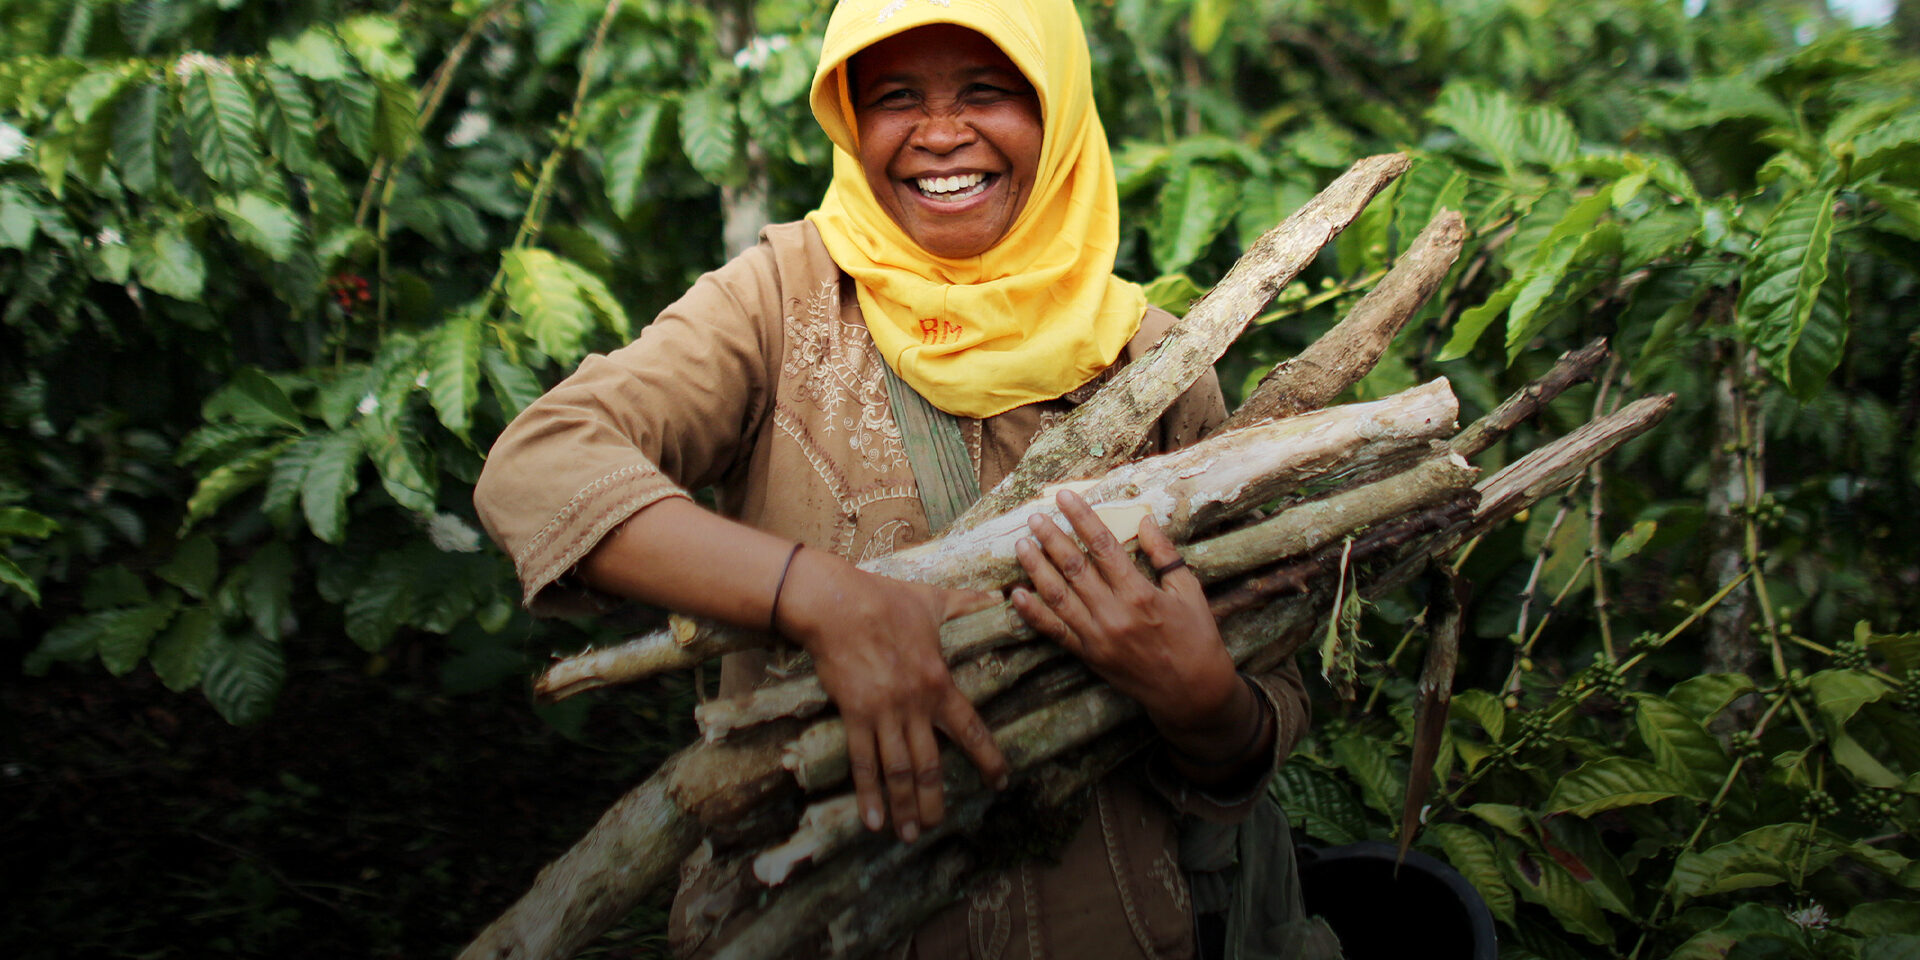 A woman smiling and carrying a bundle of sticks.